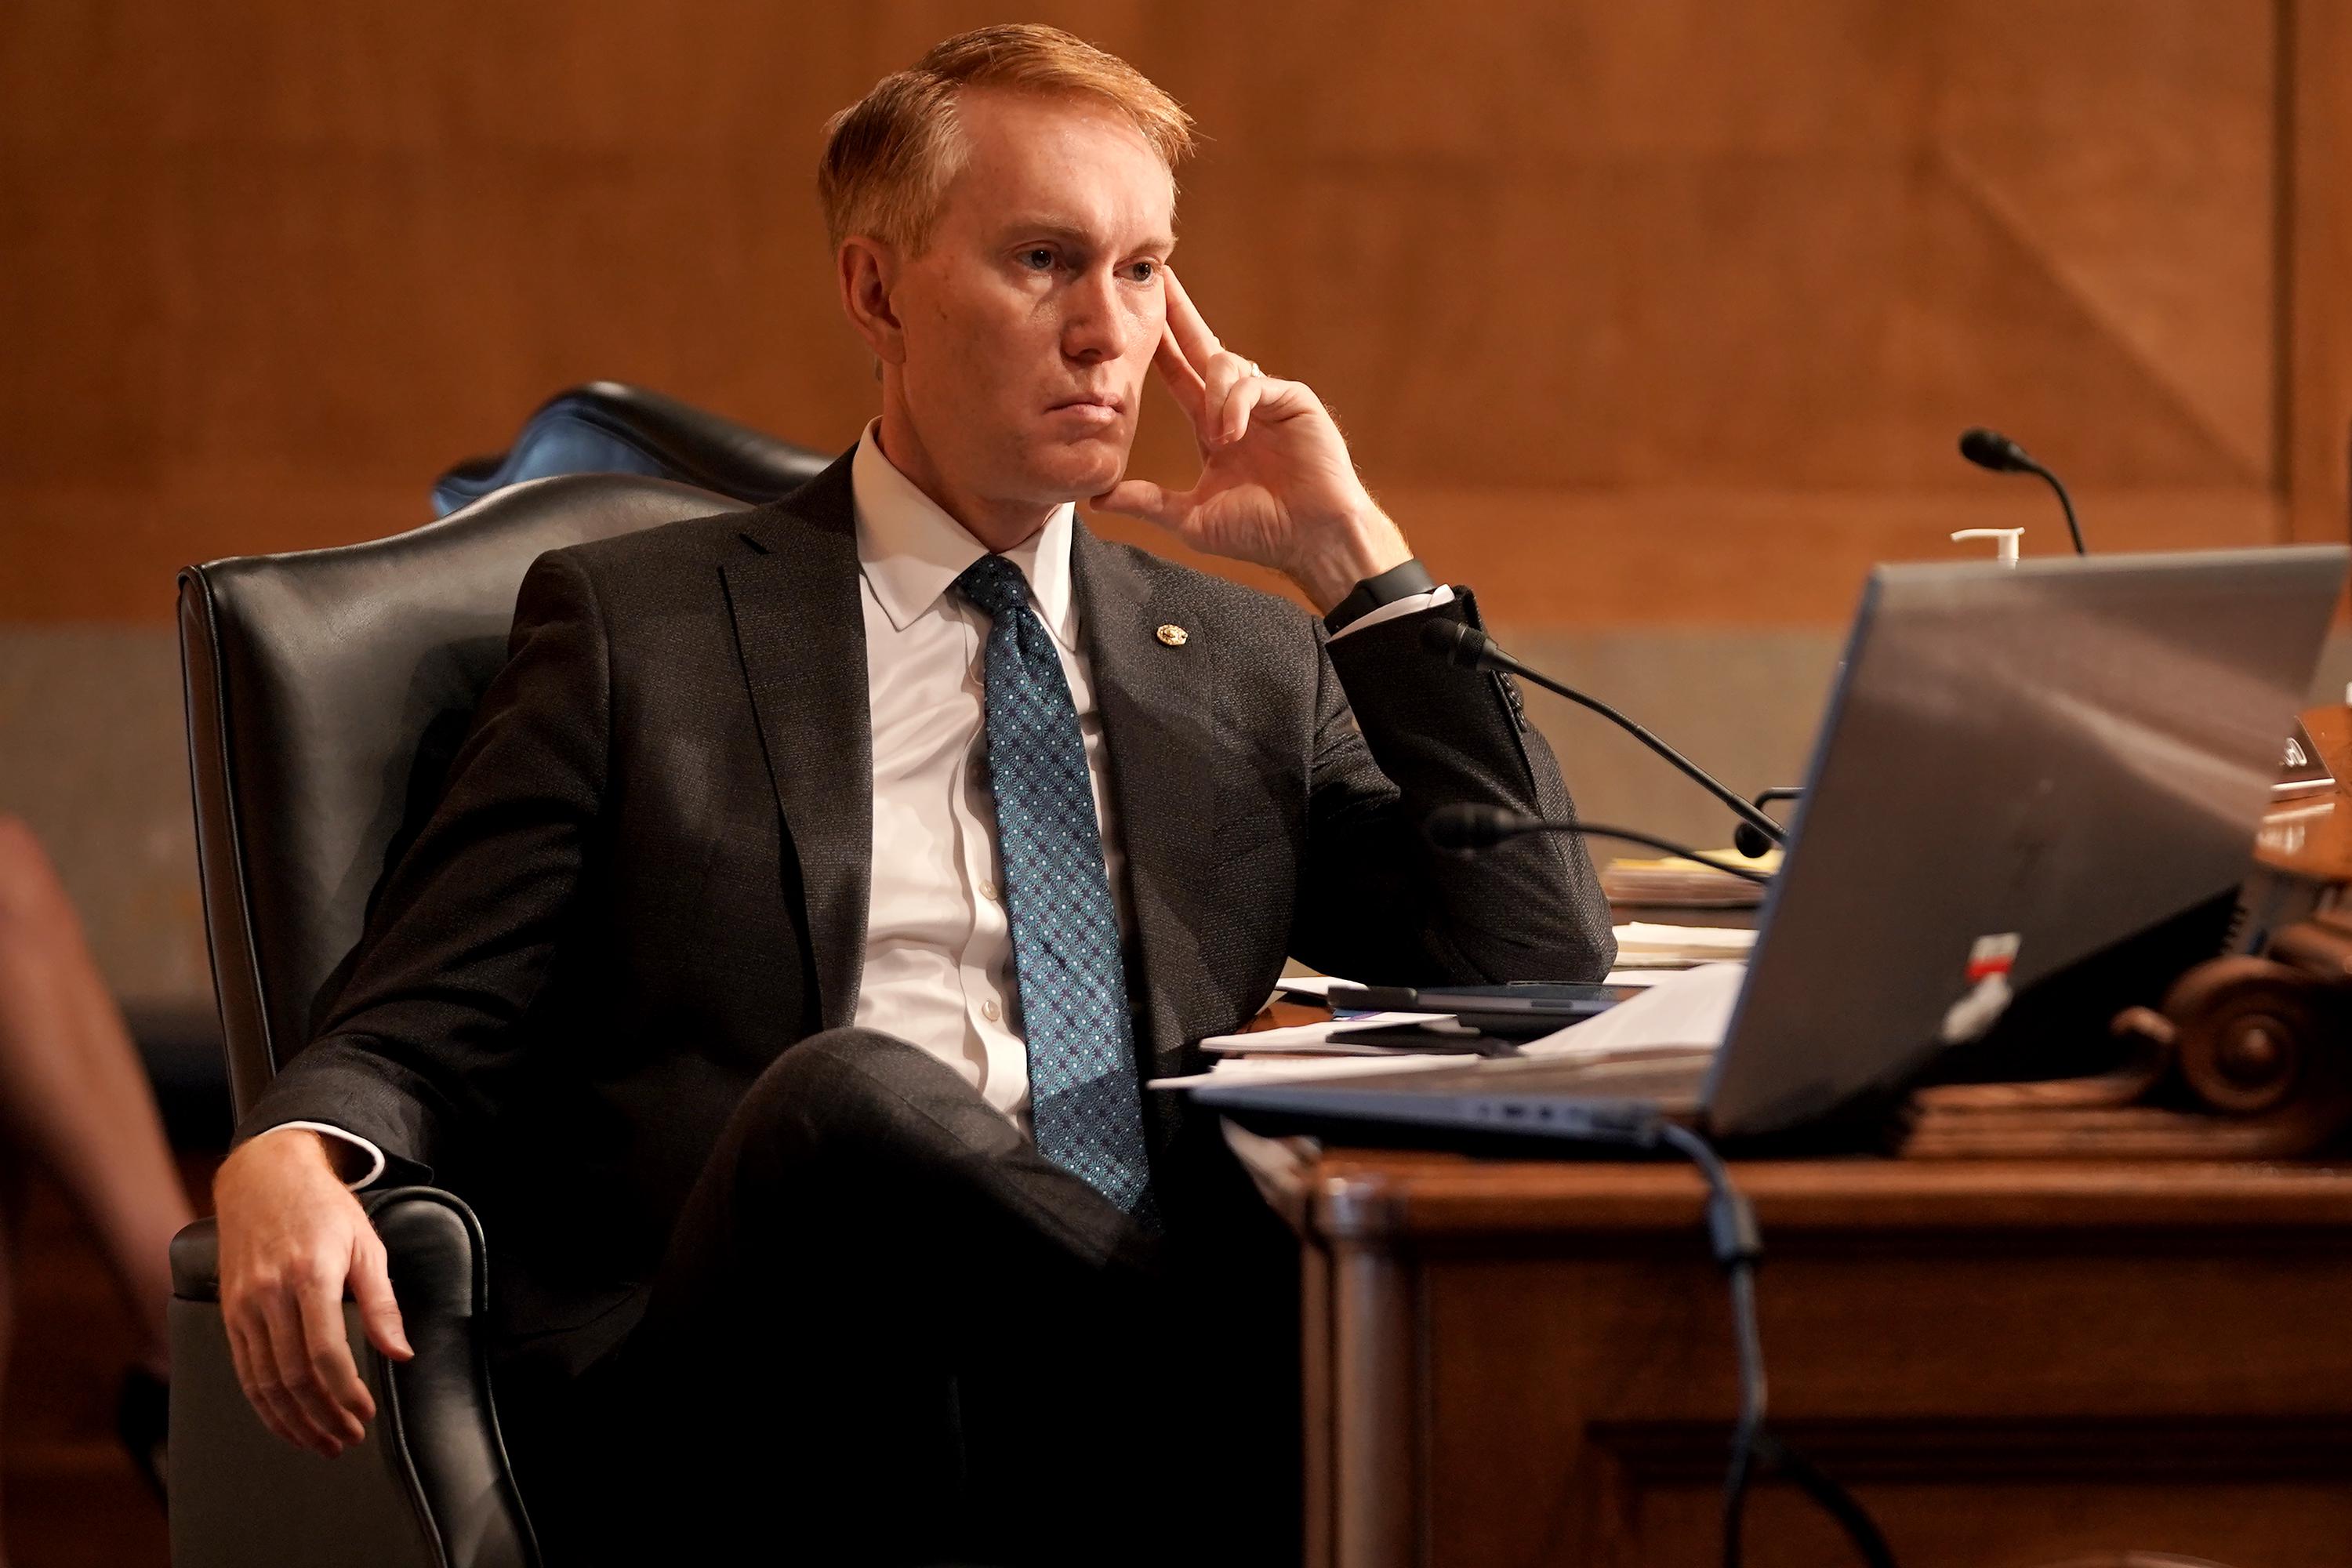 Sen. James Lankford sits with his legs crossed at a table during a committee hearing.